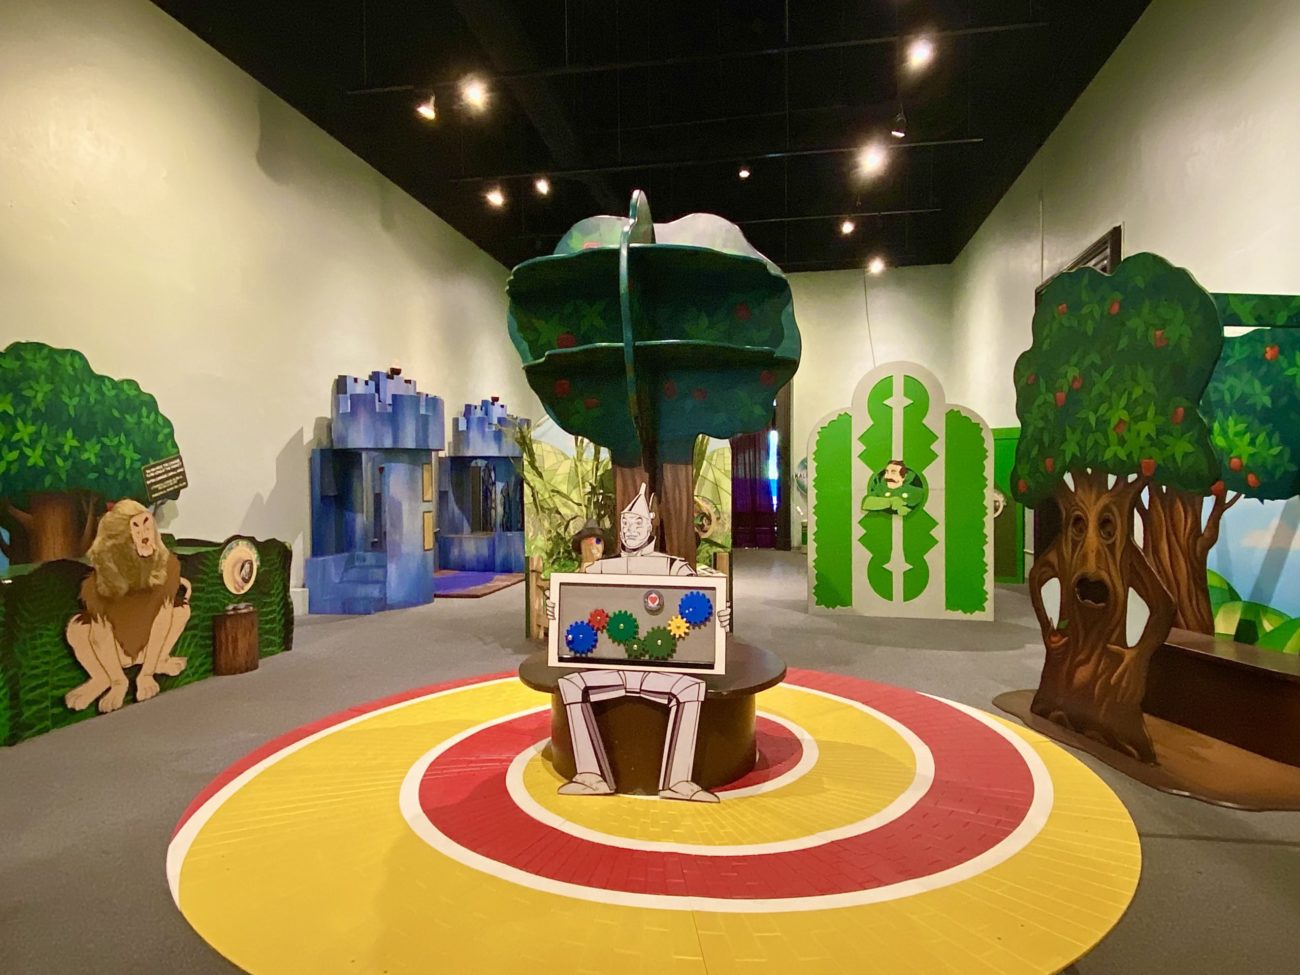 Follow the Yellow Brick Road! 'The Wizard of Oz' Exhibit Opens at